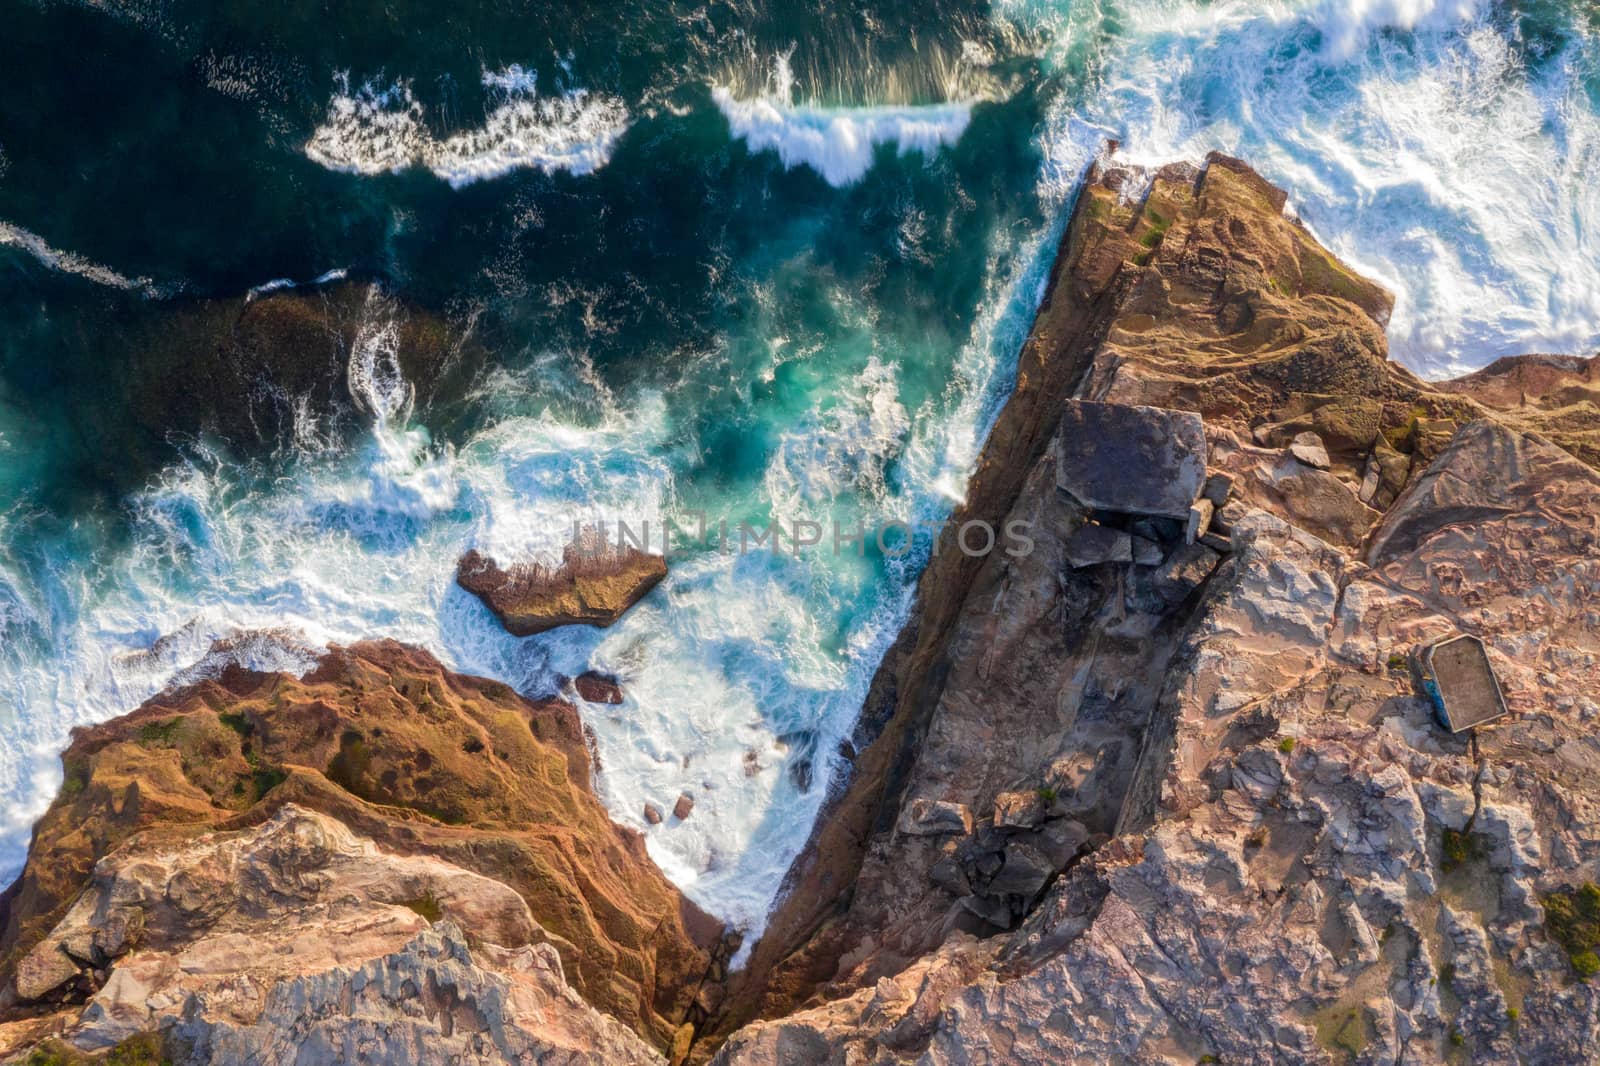 The rocky coastline of East Sydney where the cliffs have broken off in large chunks and waves continually batter the exposed lower areas wearing them down bit by bit.